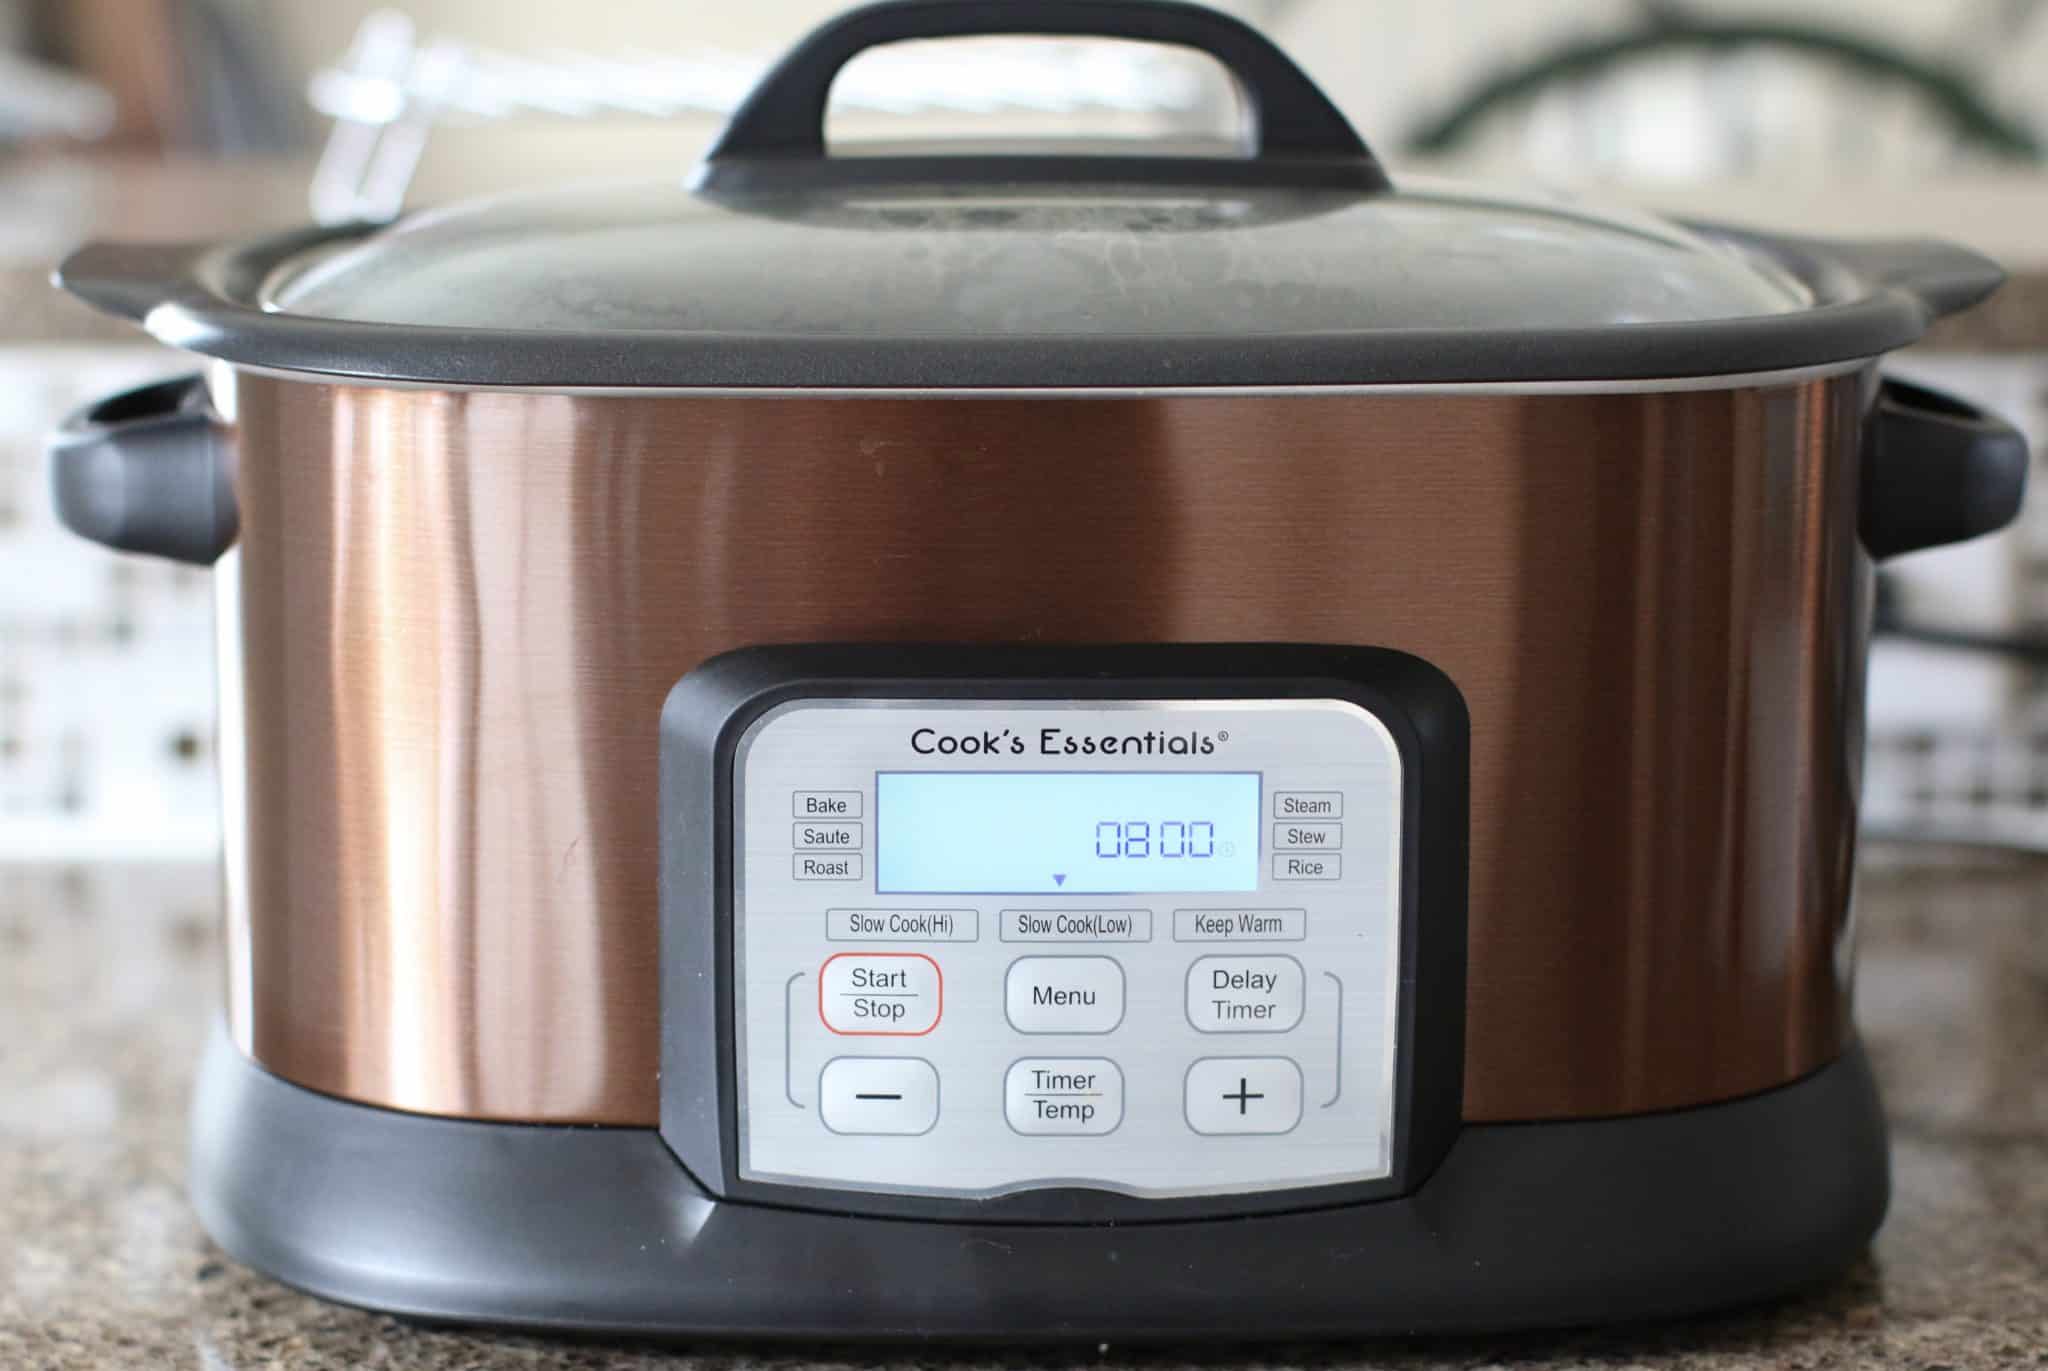 Cook's Essentials slow cooker with lid and the digital timer showing 8 hours.